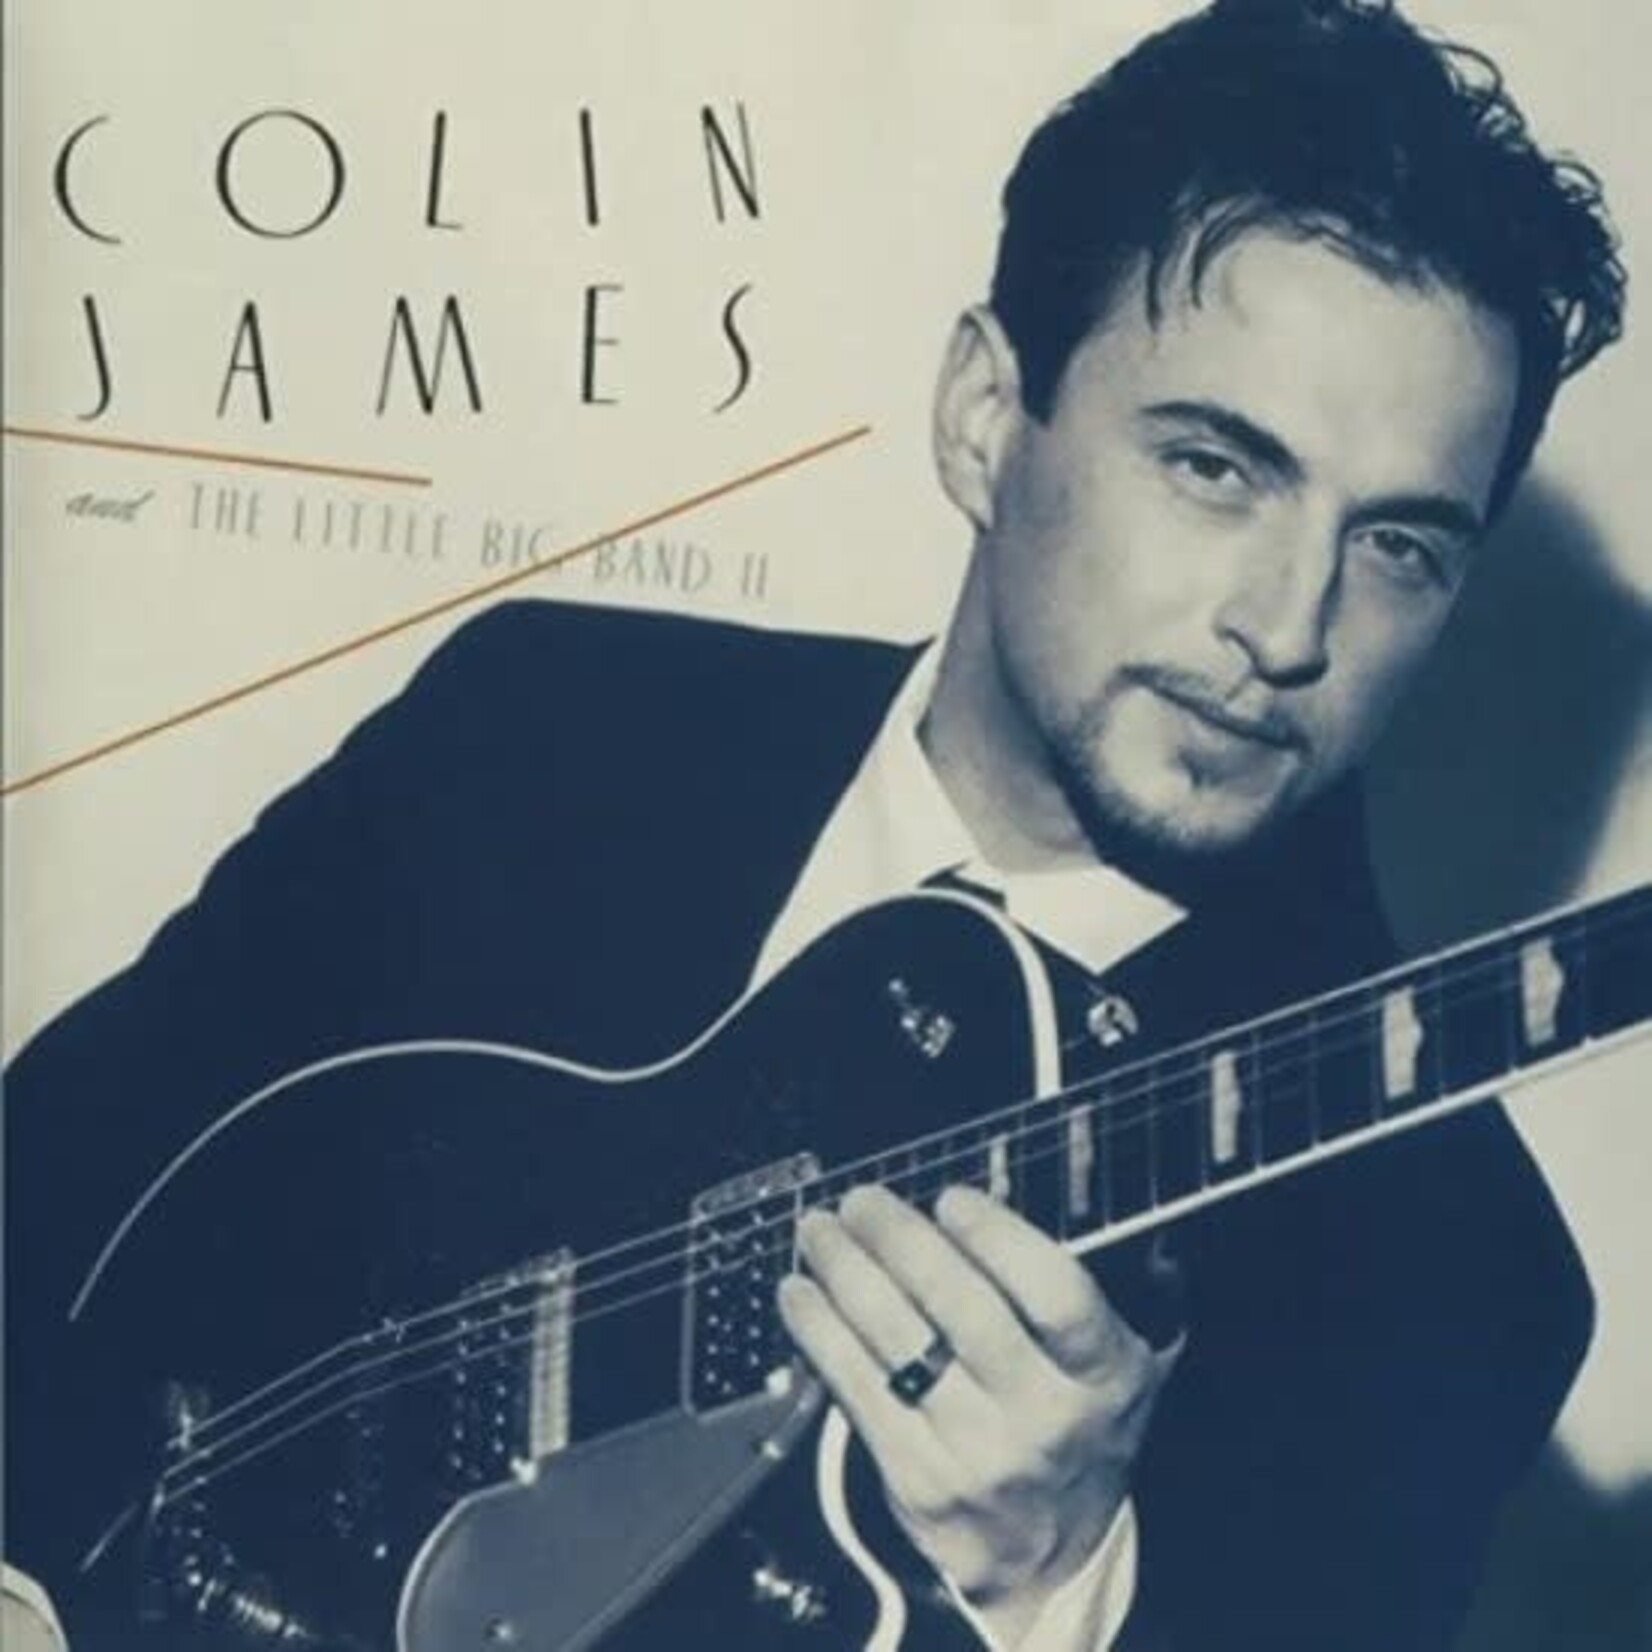 Colin James - Colin James And The Little Big Band II [USED CD]